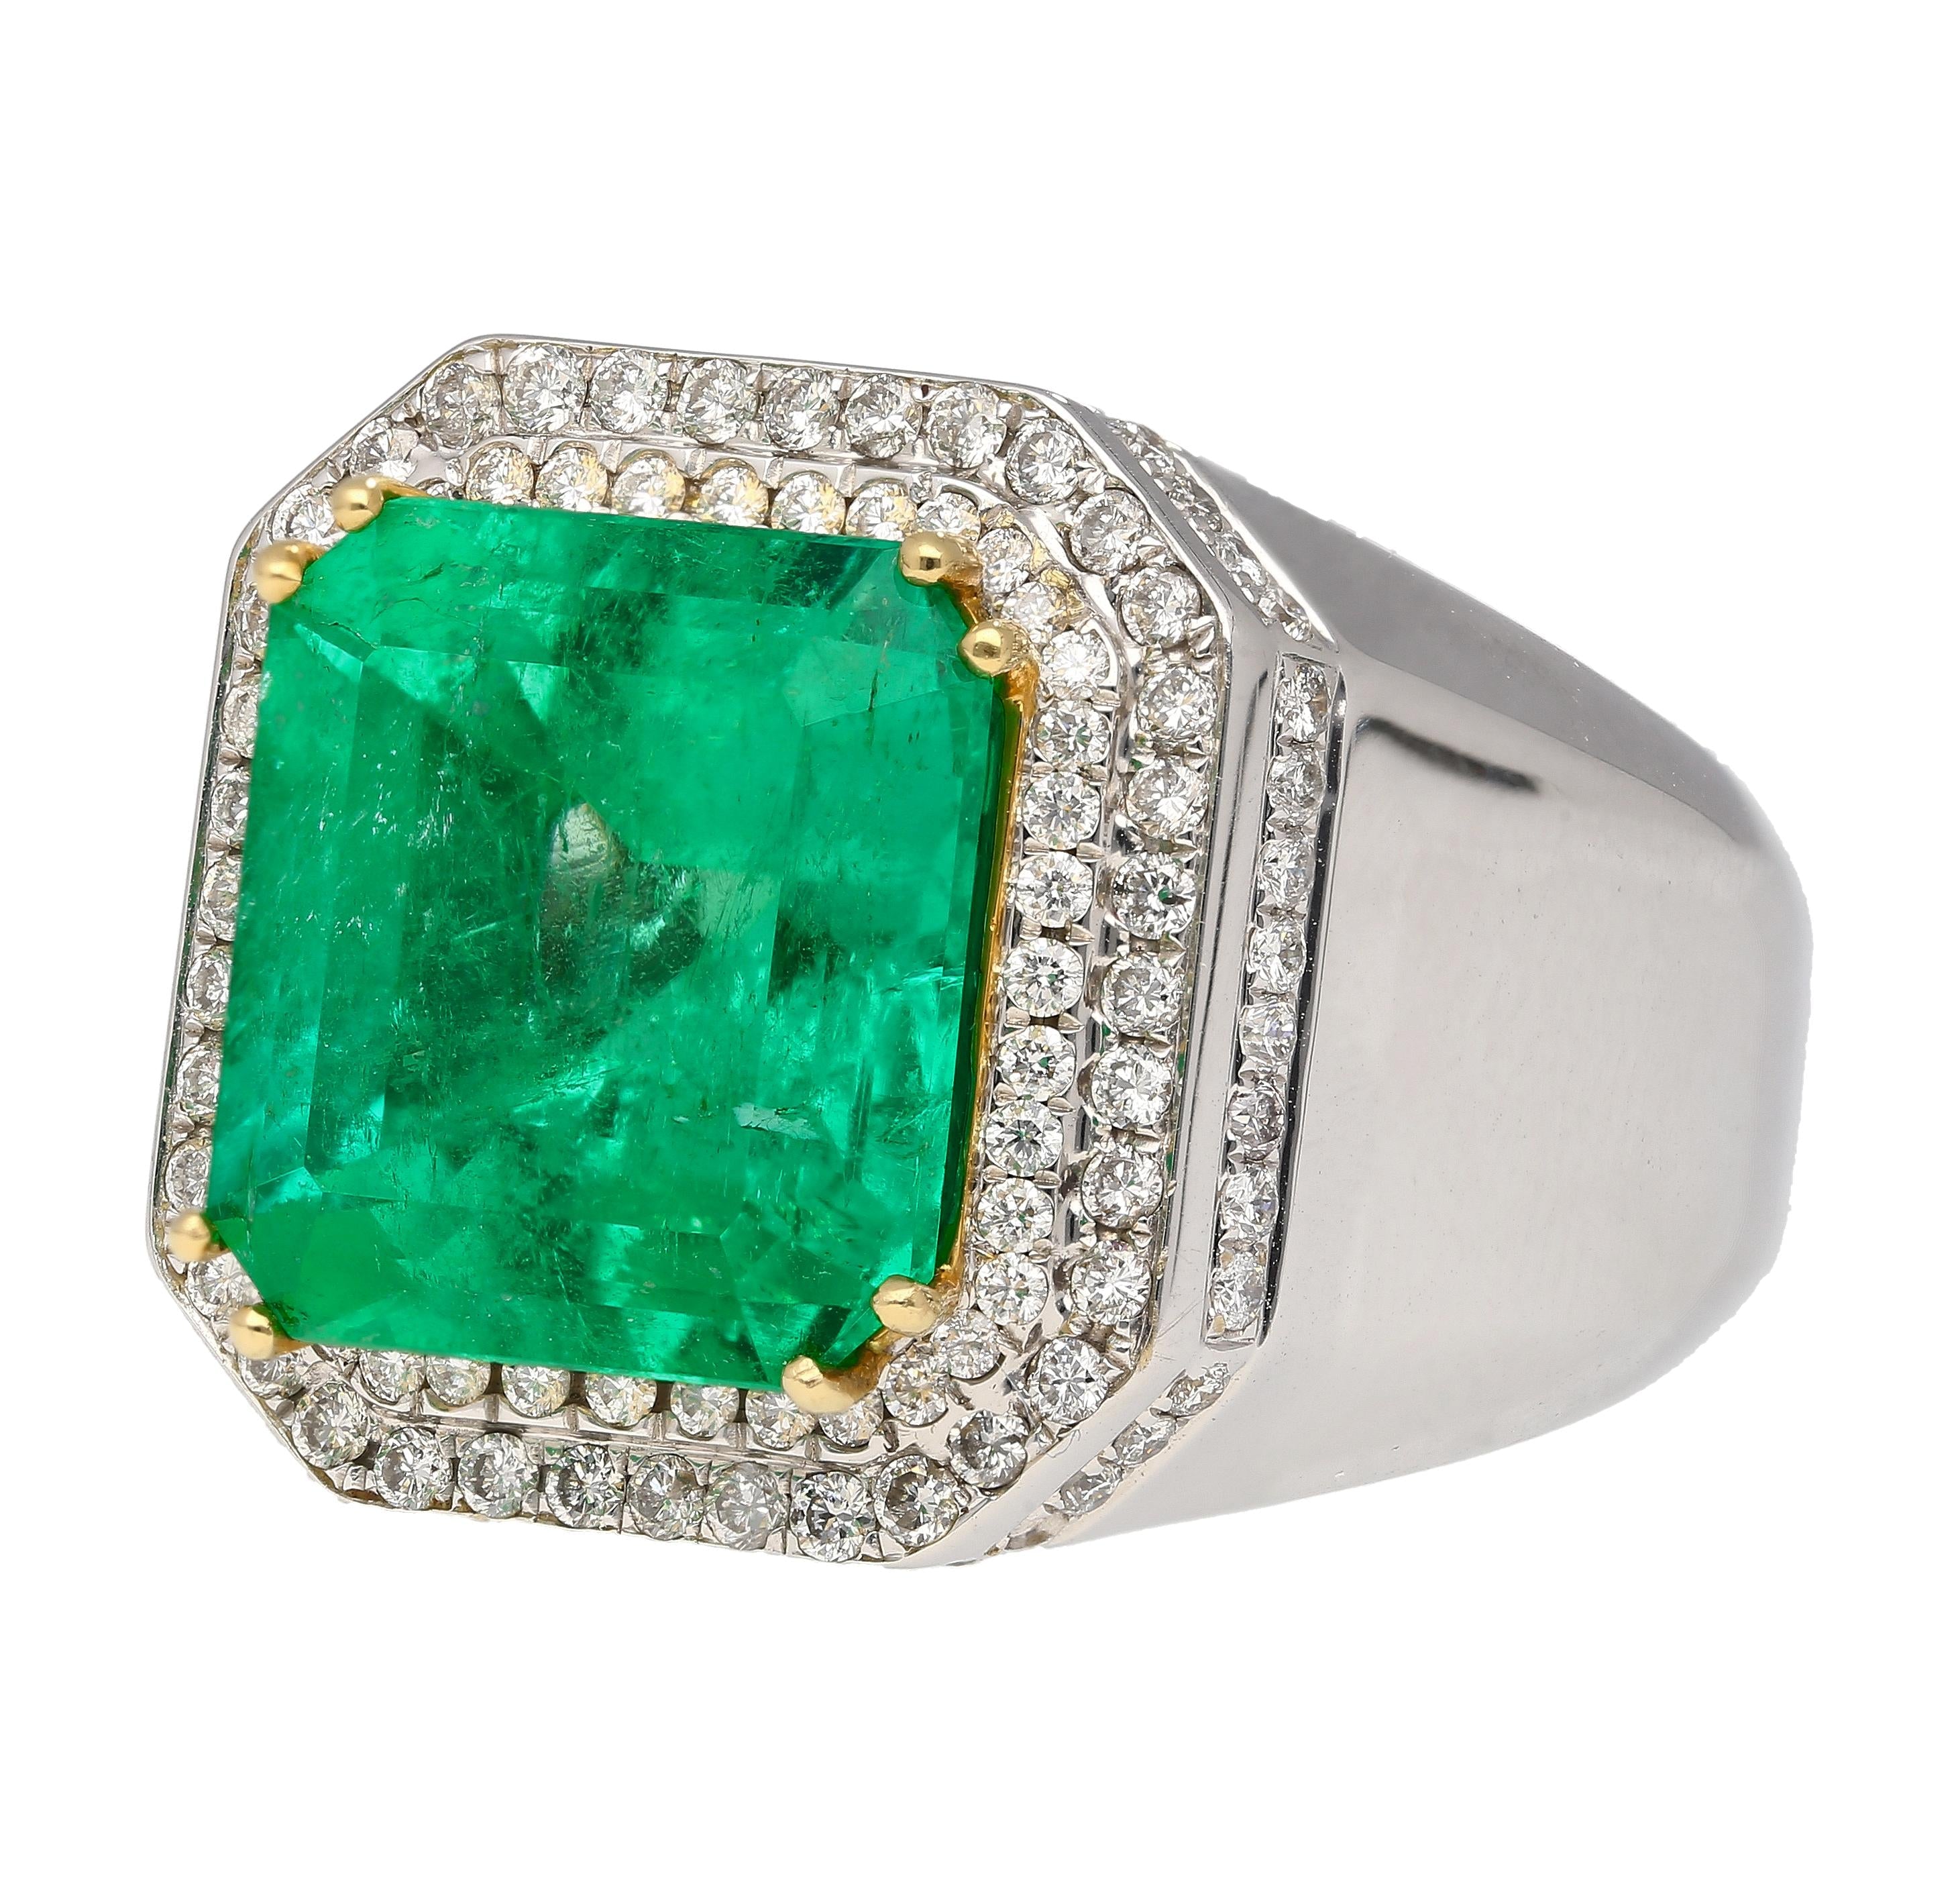 GRS 9.54 Carat Colombian Emerald Insignificant Oil and Diamond Halo Mens Ring